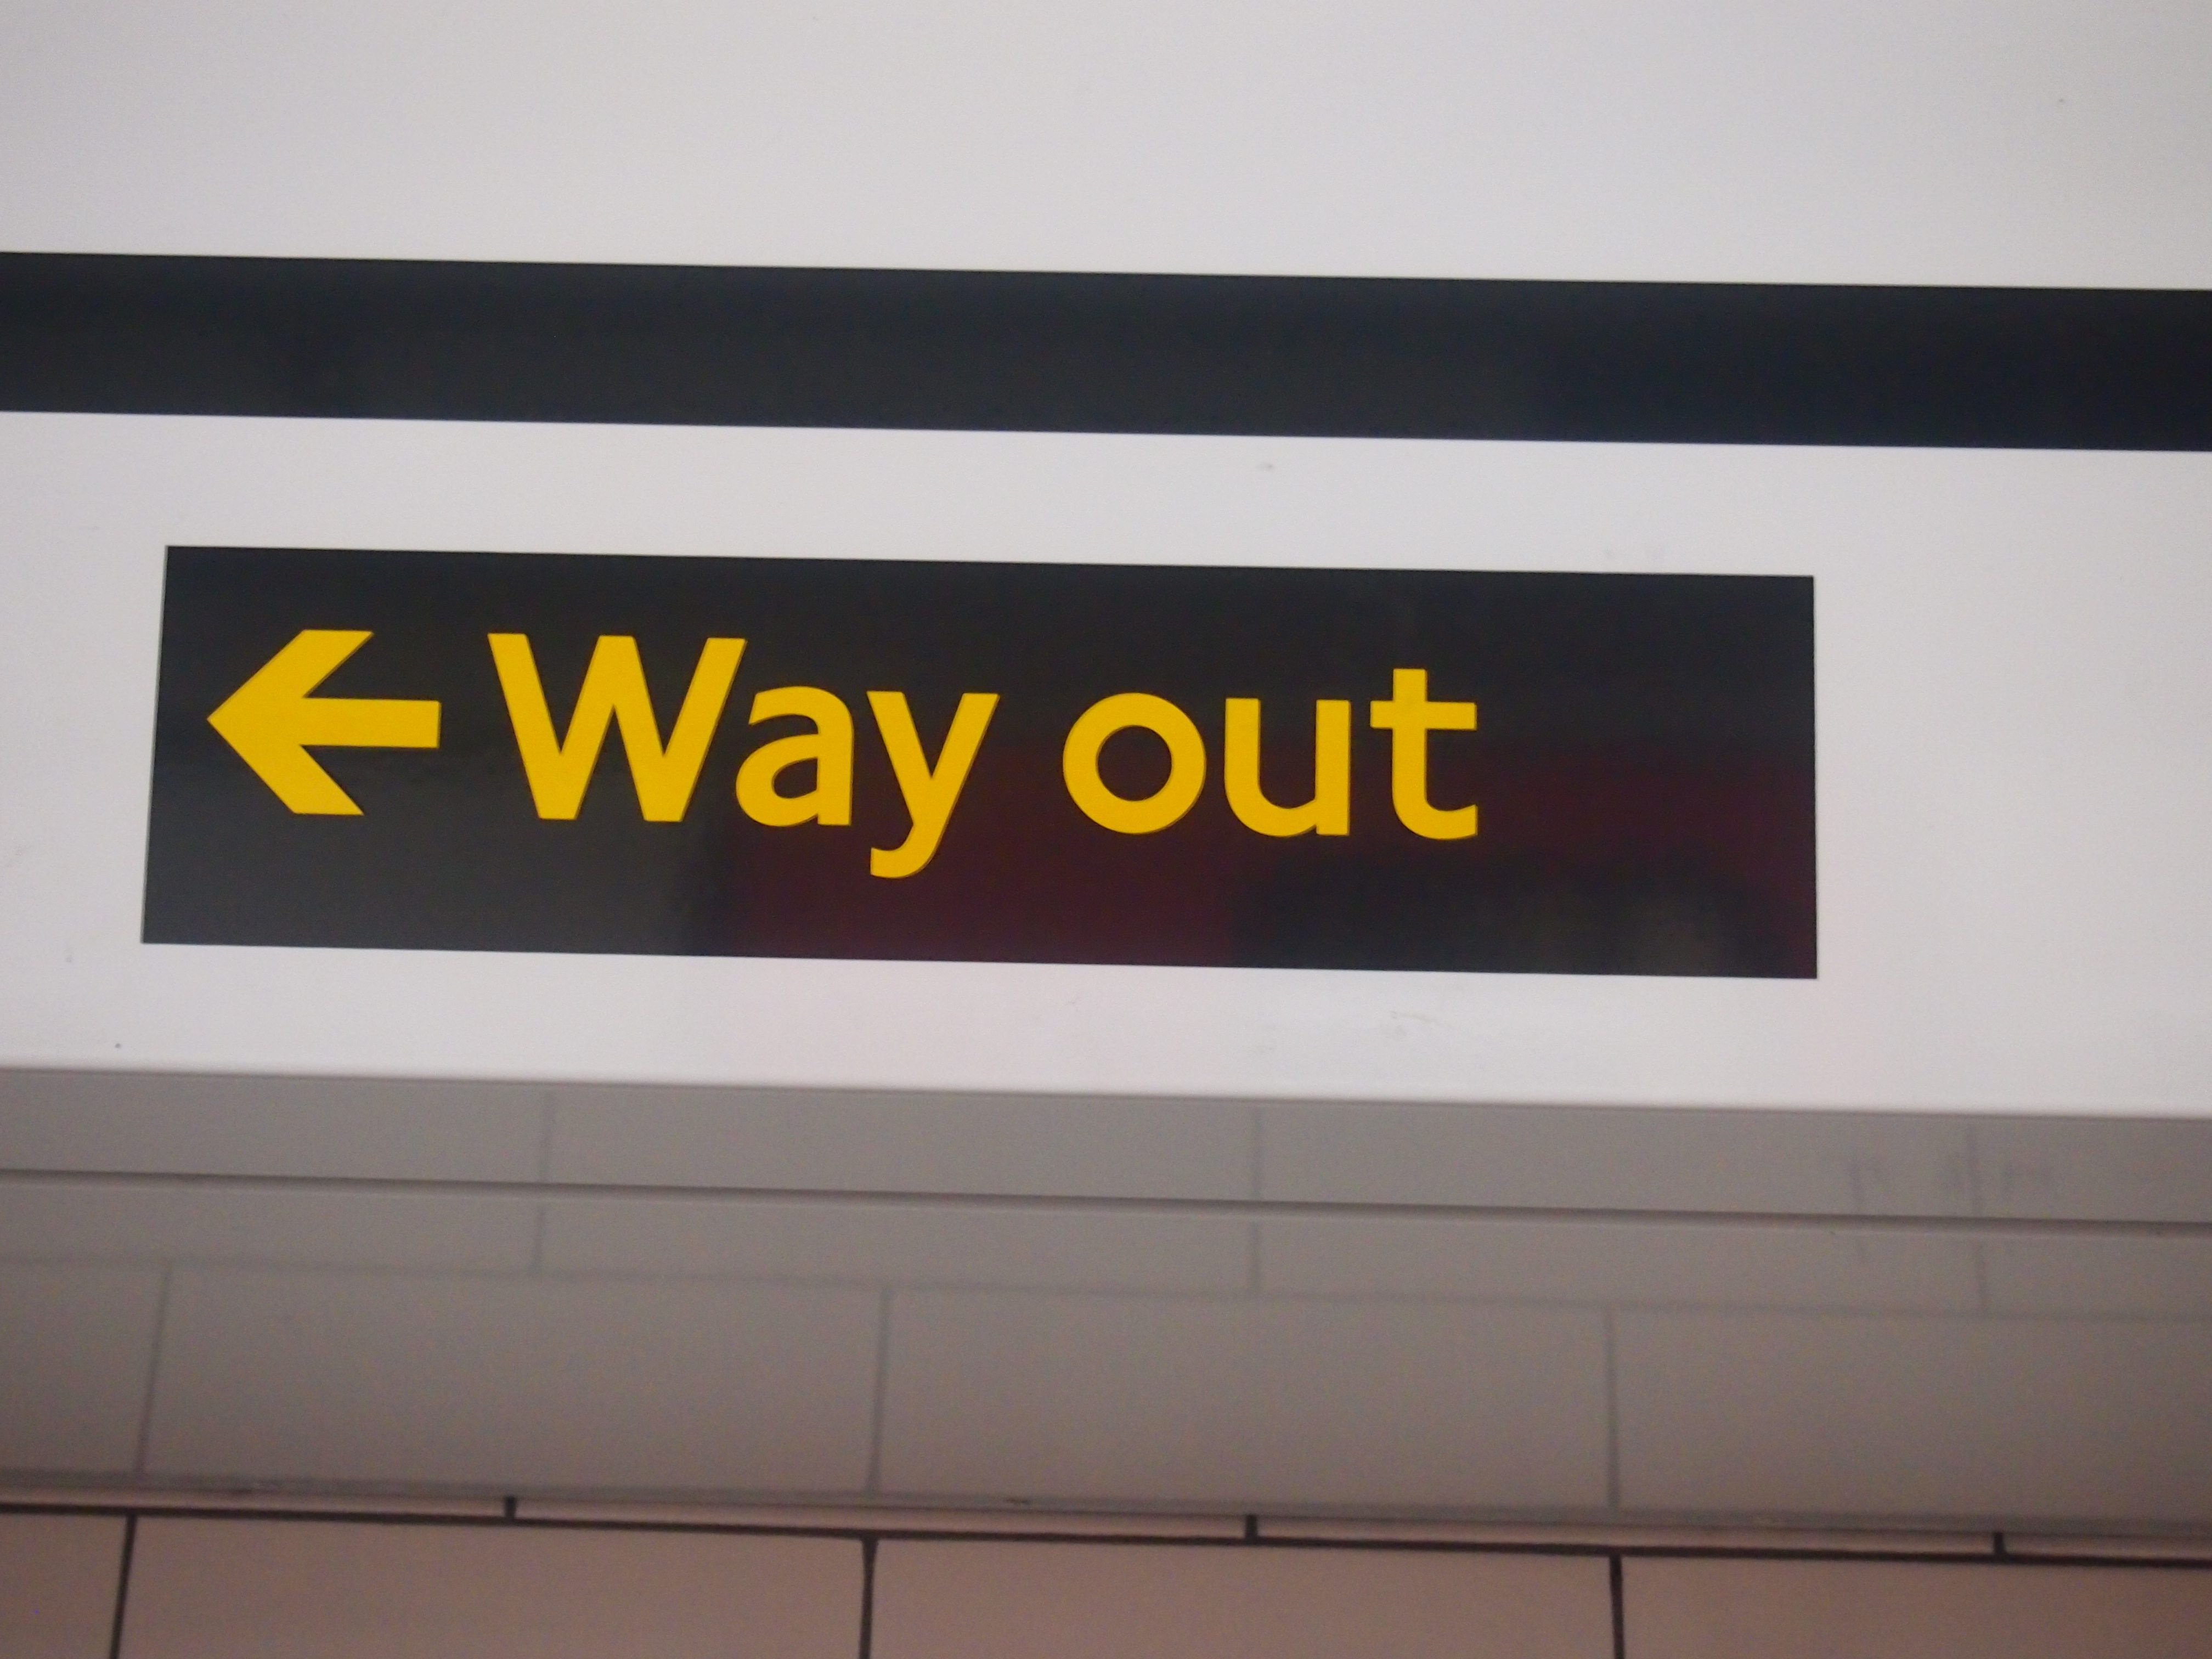 Way out sign in London Tube.